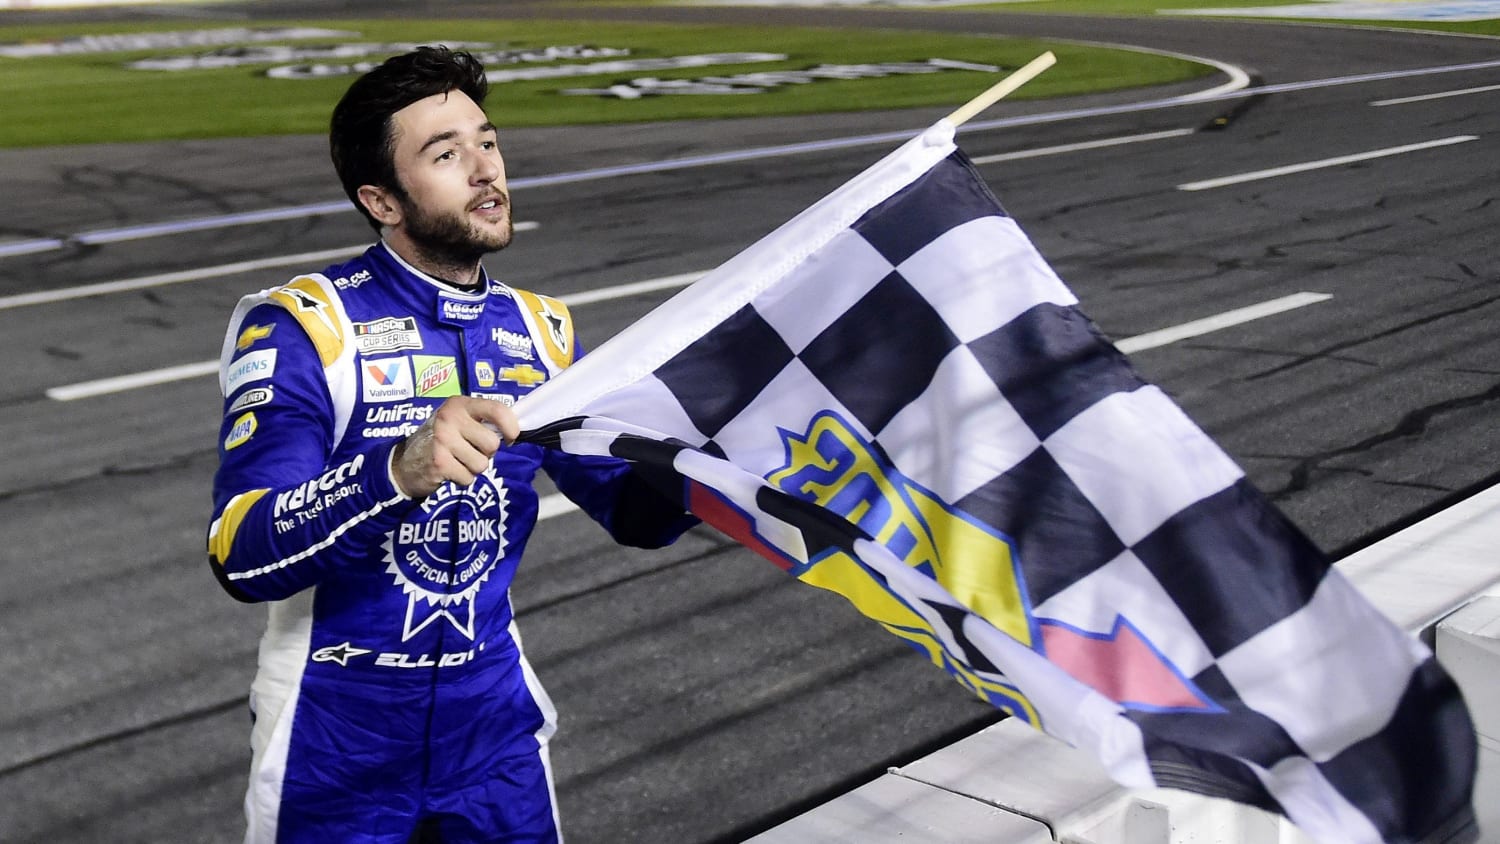 Chase Elliott was ready for the worst in final laps of first 2020 NASCAR win: Thought 'I was going to crash'